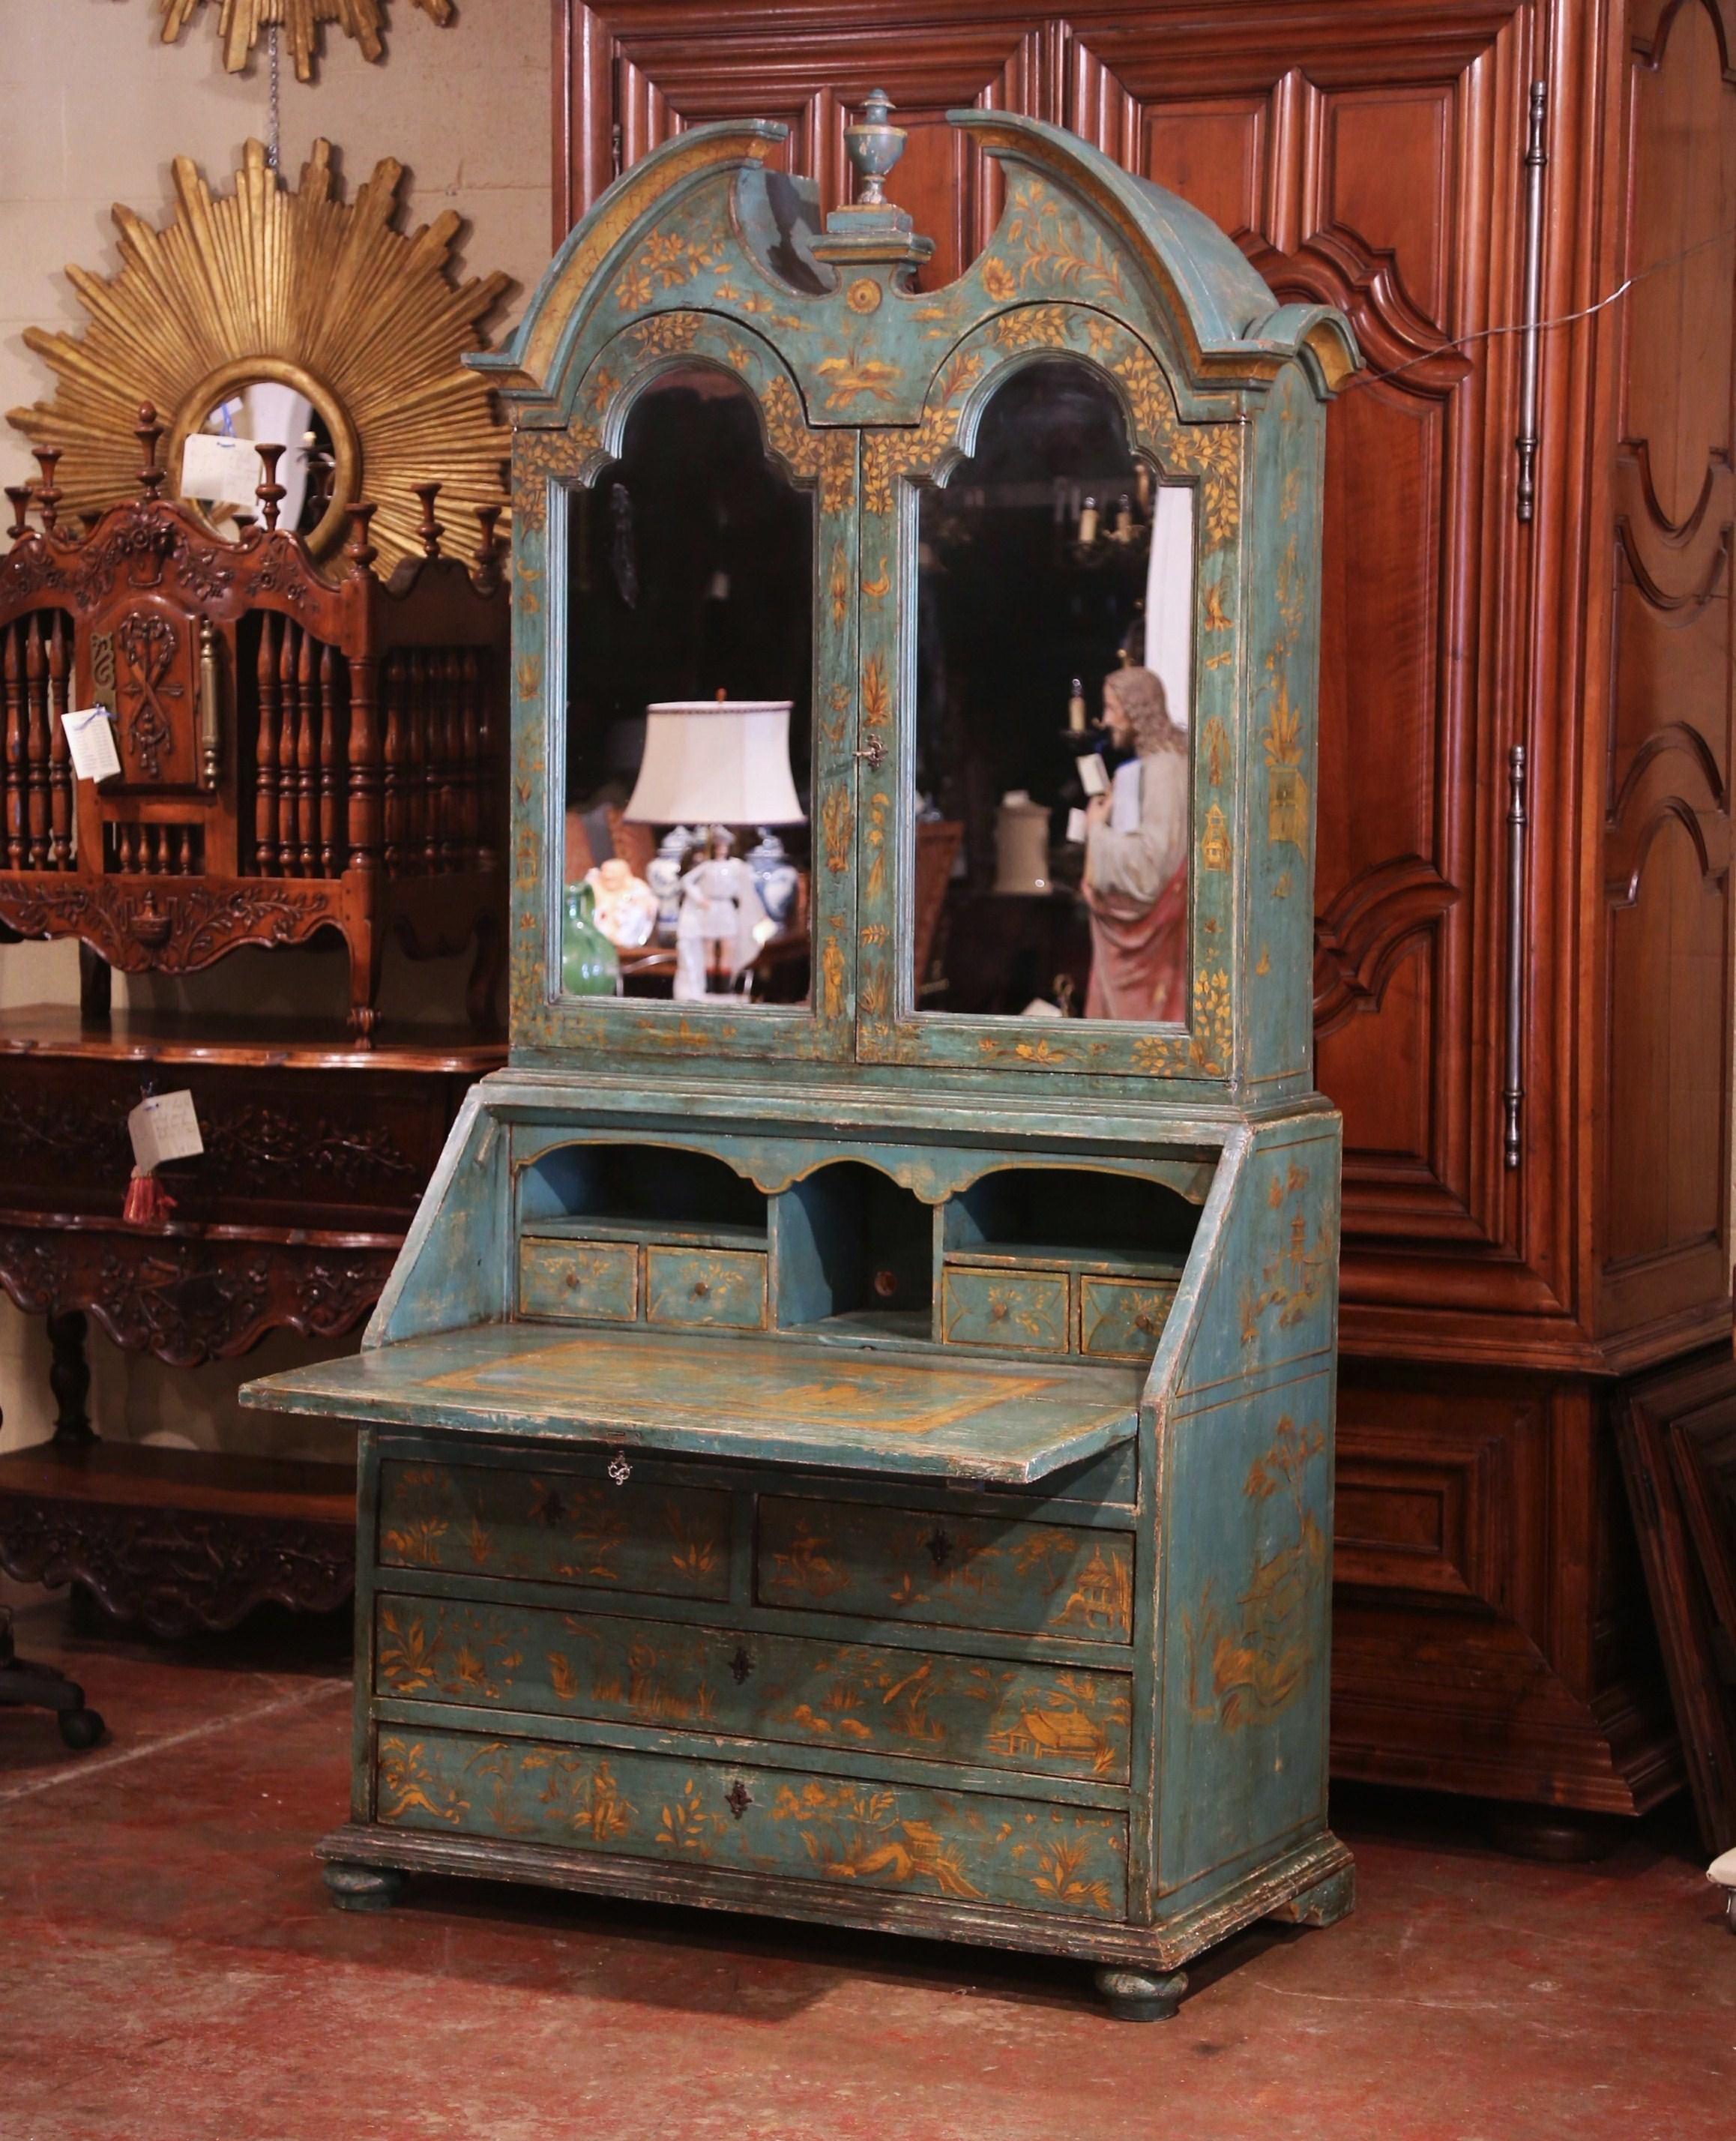 Add charm and color to your office or master bedroom with this splendid antique 